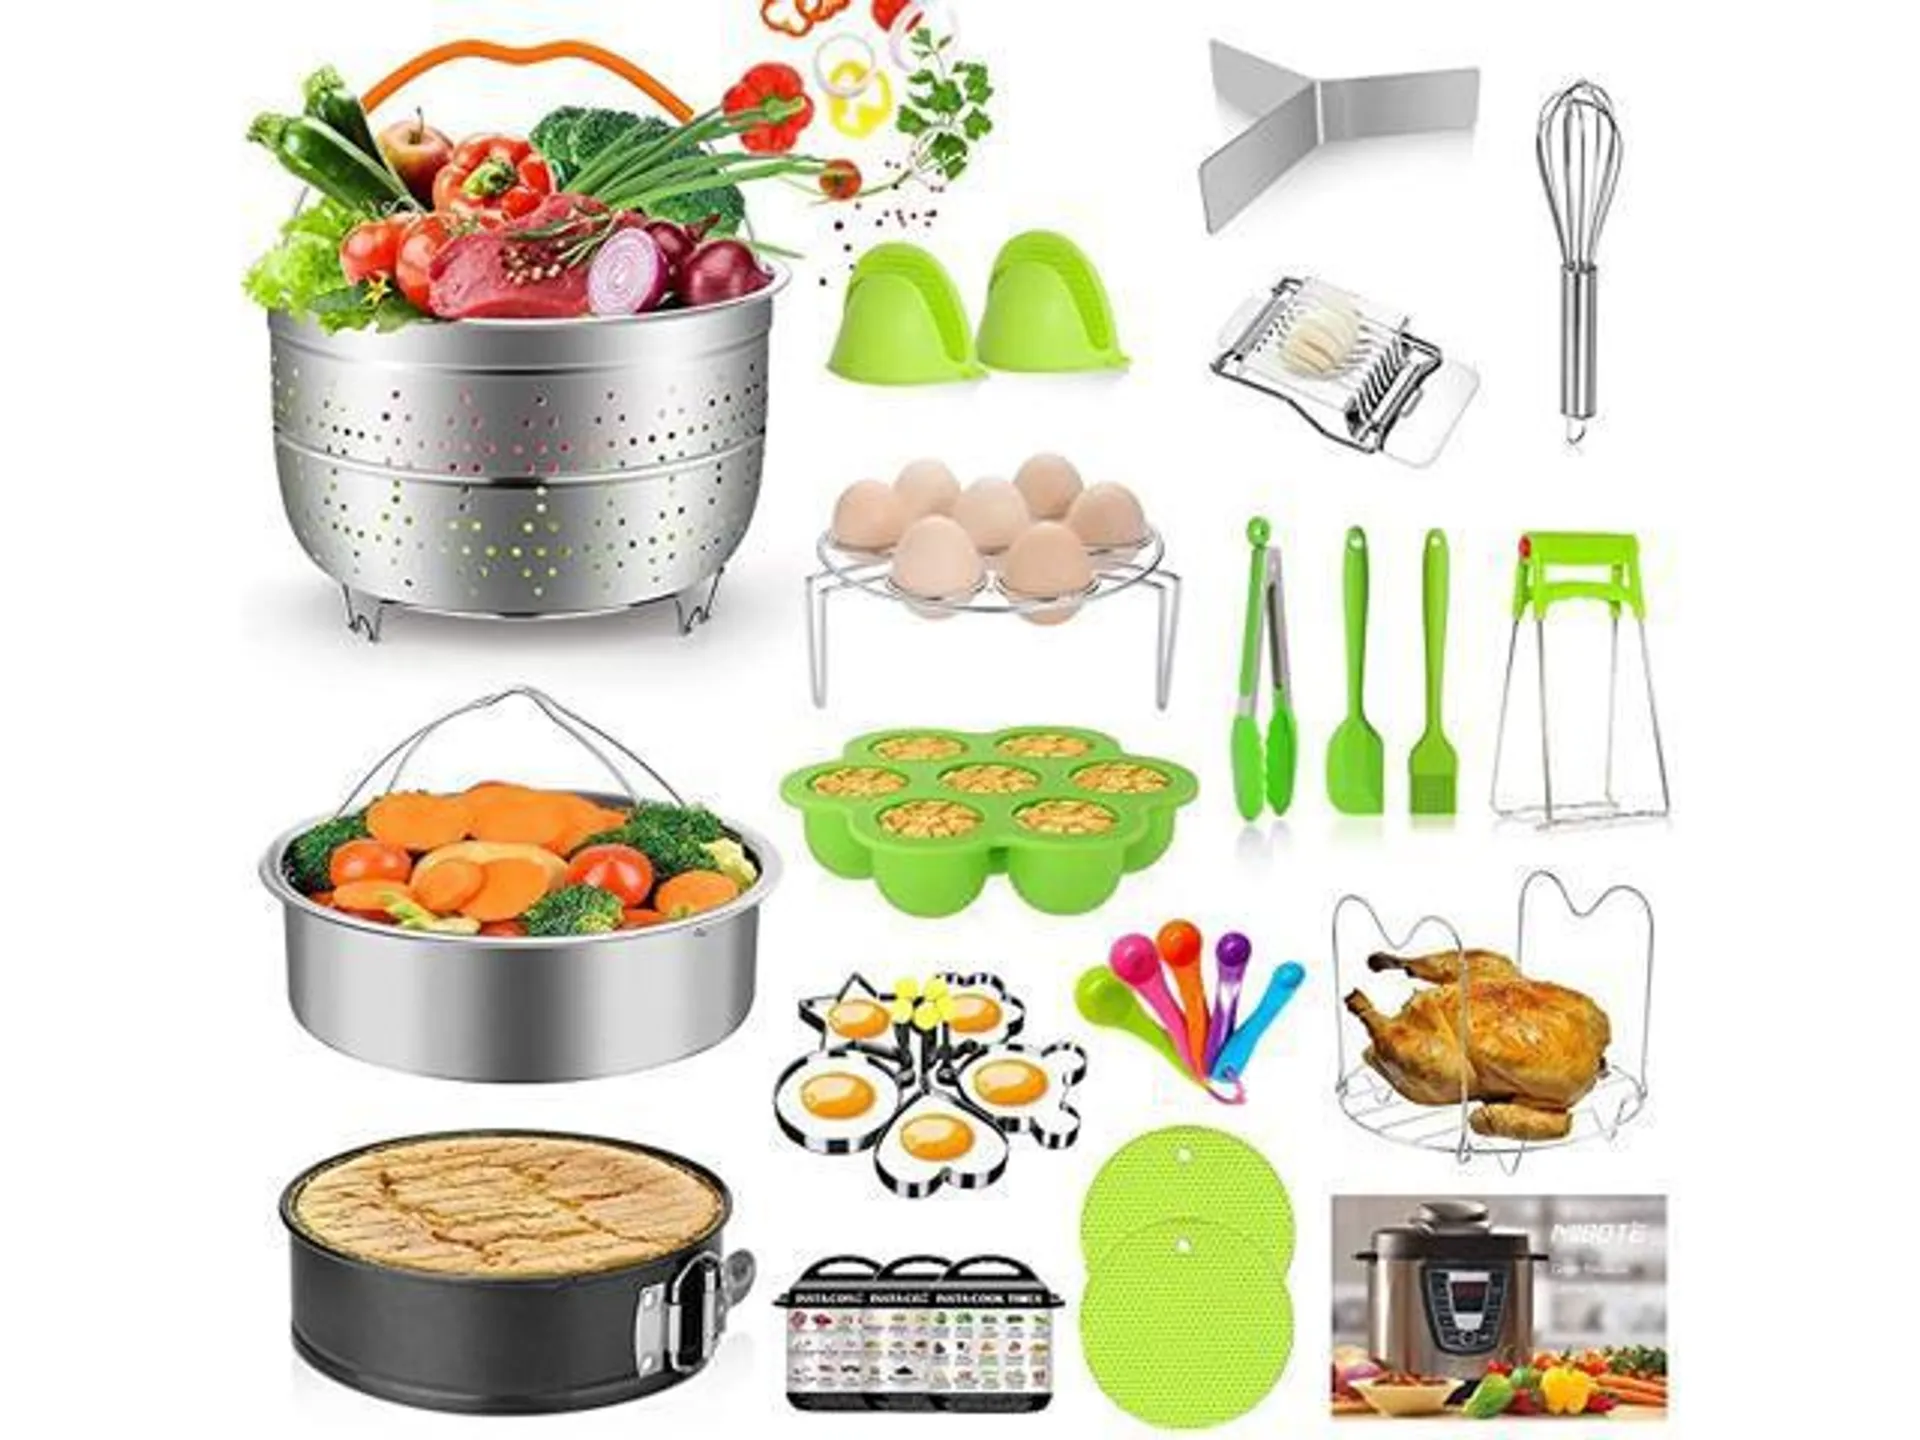 93 Pcs Accessories Set for Instant Pot 5,6,8 Qt, 2 Steamer Baskets, Springform Pan, Egg Steamer Rack, Egg Bites Mold, Kitchen Tong, Silicone Pad, Oven Mitts, Cheat Sheet Magnet, and etc